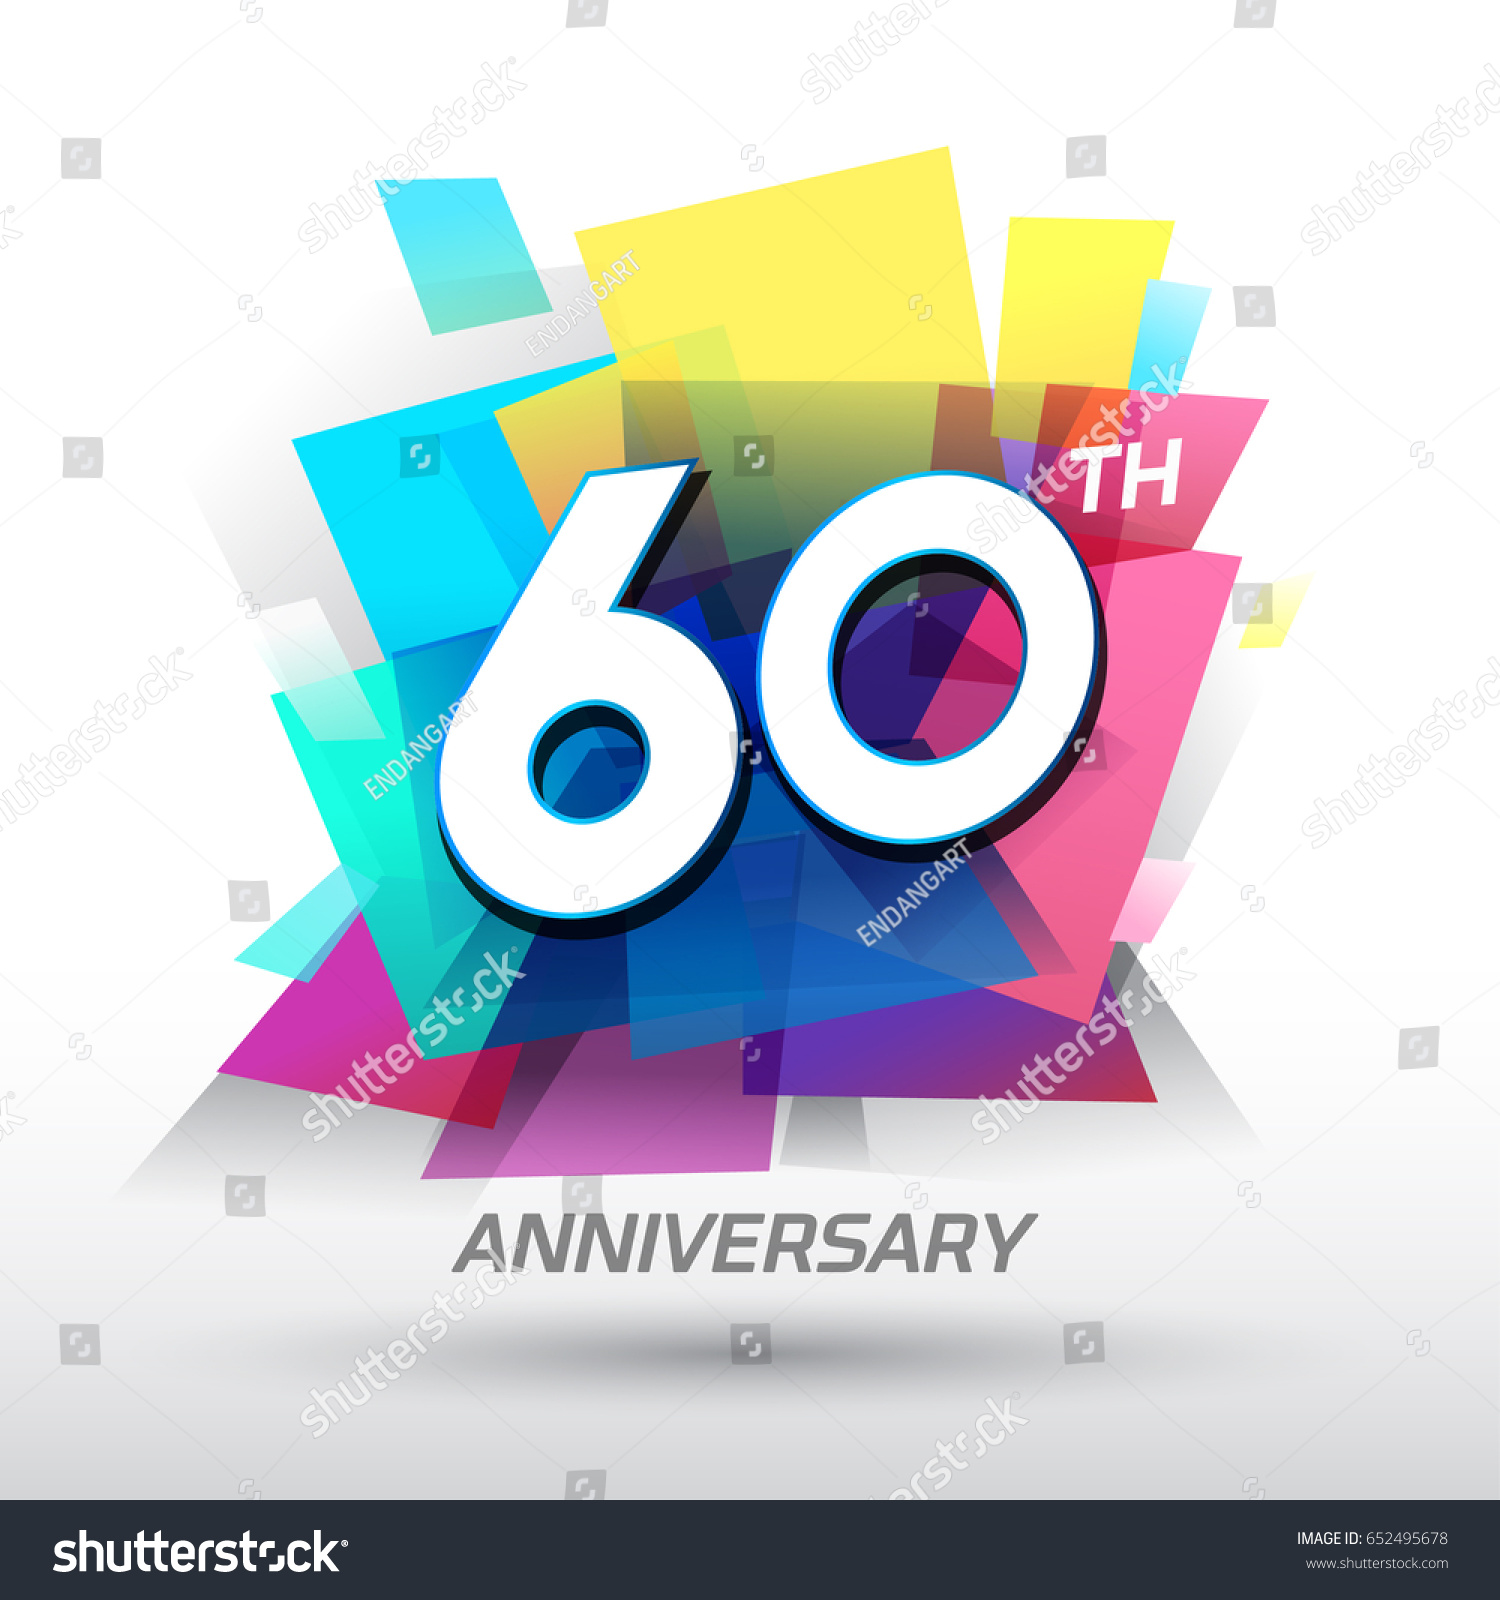 SVG of 60 years Anniversary with confetti and celebration background, logo design template svg